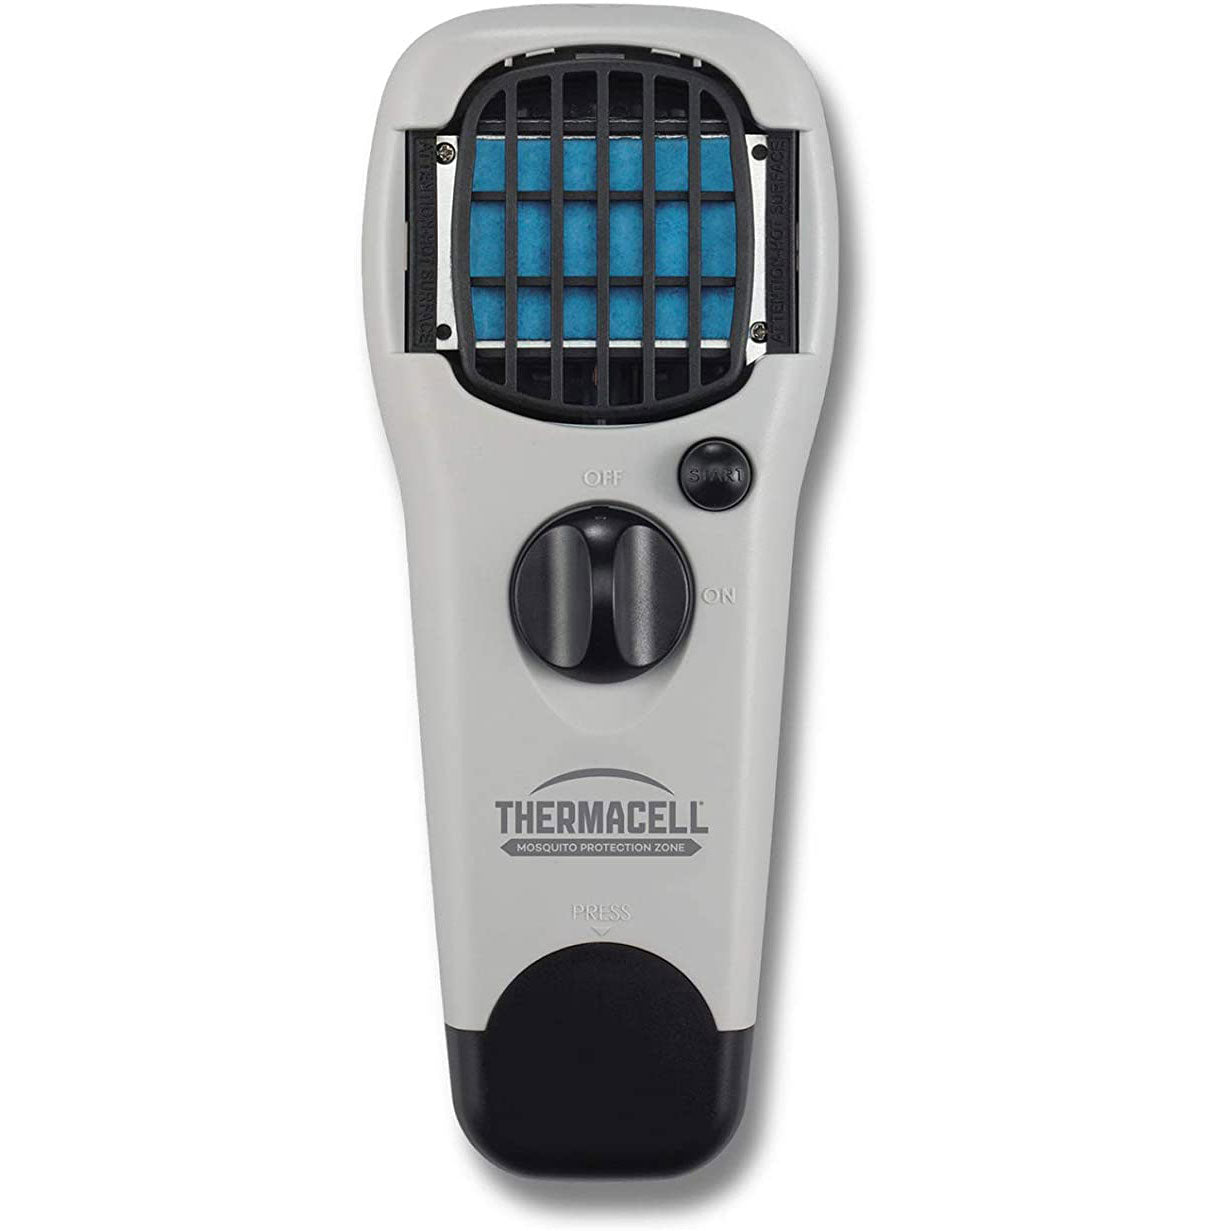 Thermacell Portable Mosquito Repeller Thermacell Indigo Pool Patio BBQ